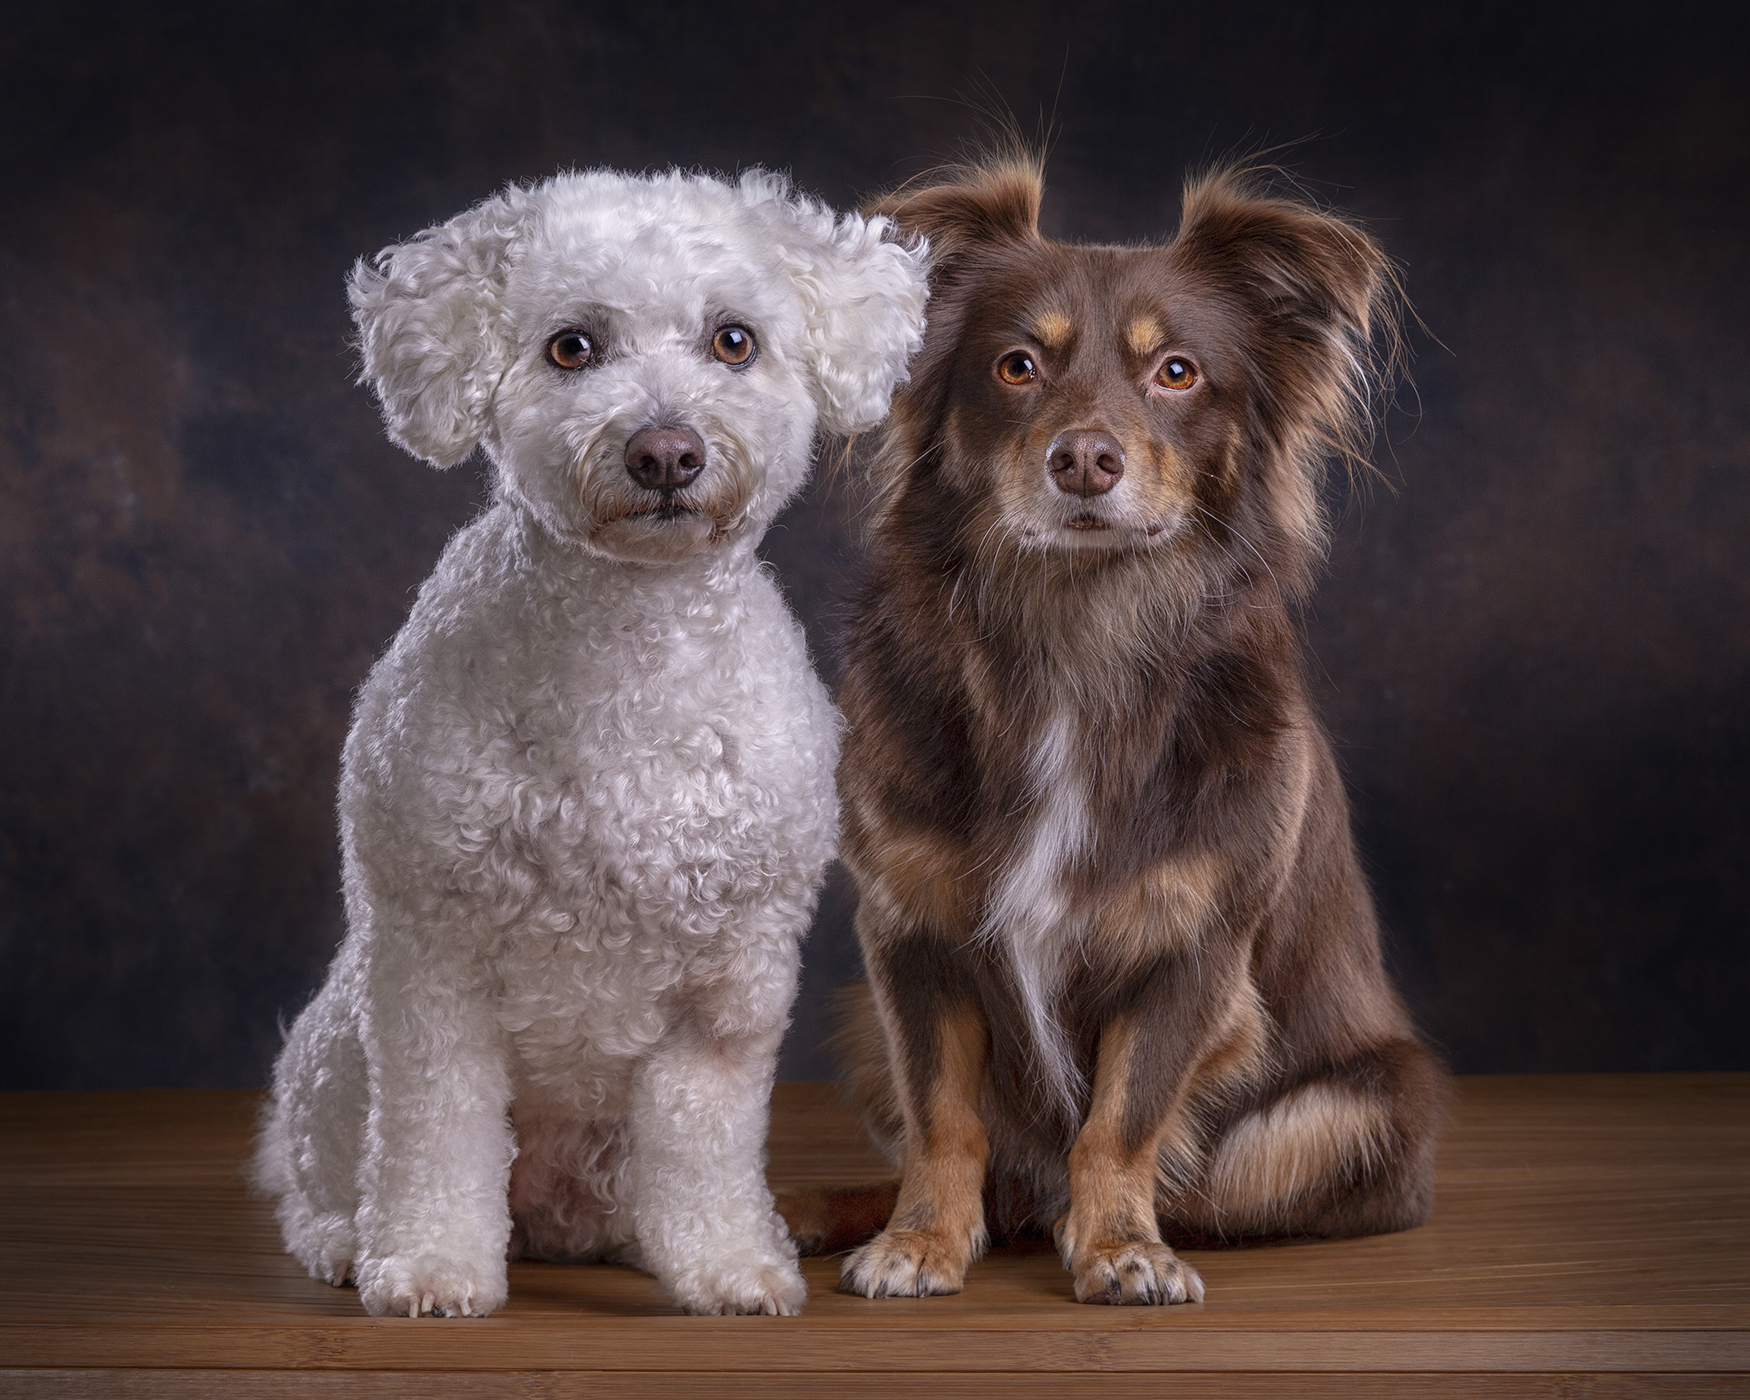 Five Star Photographer, When we left the studio we talked about how professional and friendly our session was all the way home.    I recommended the studio to all my dog friends  :) "    Stephanie Summers